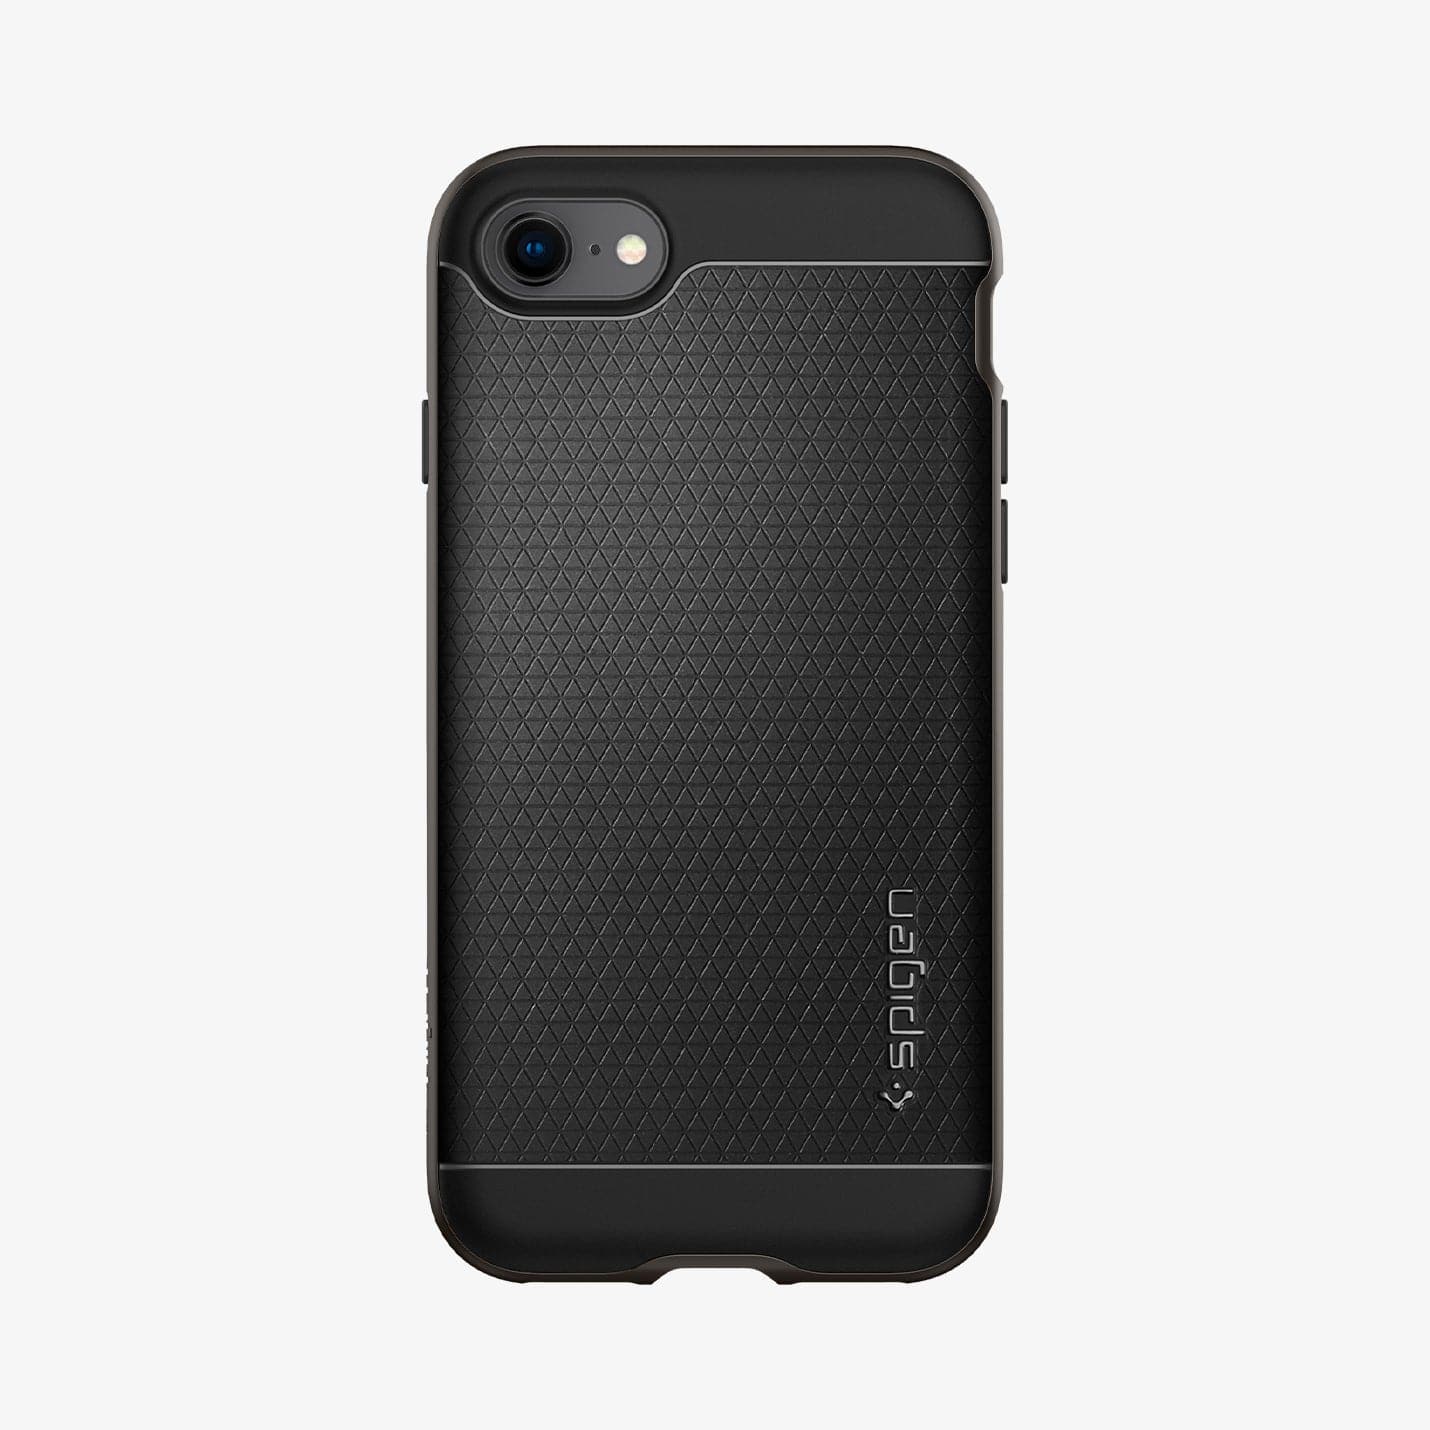 054CS22358 - iPhone 7 Series Neo Hybrid Case in Gunmetal showing the back